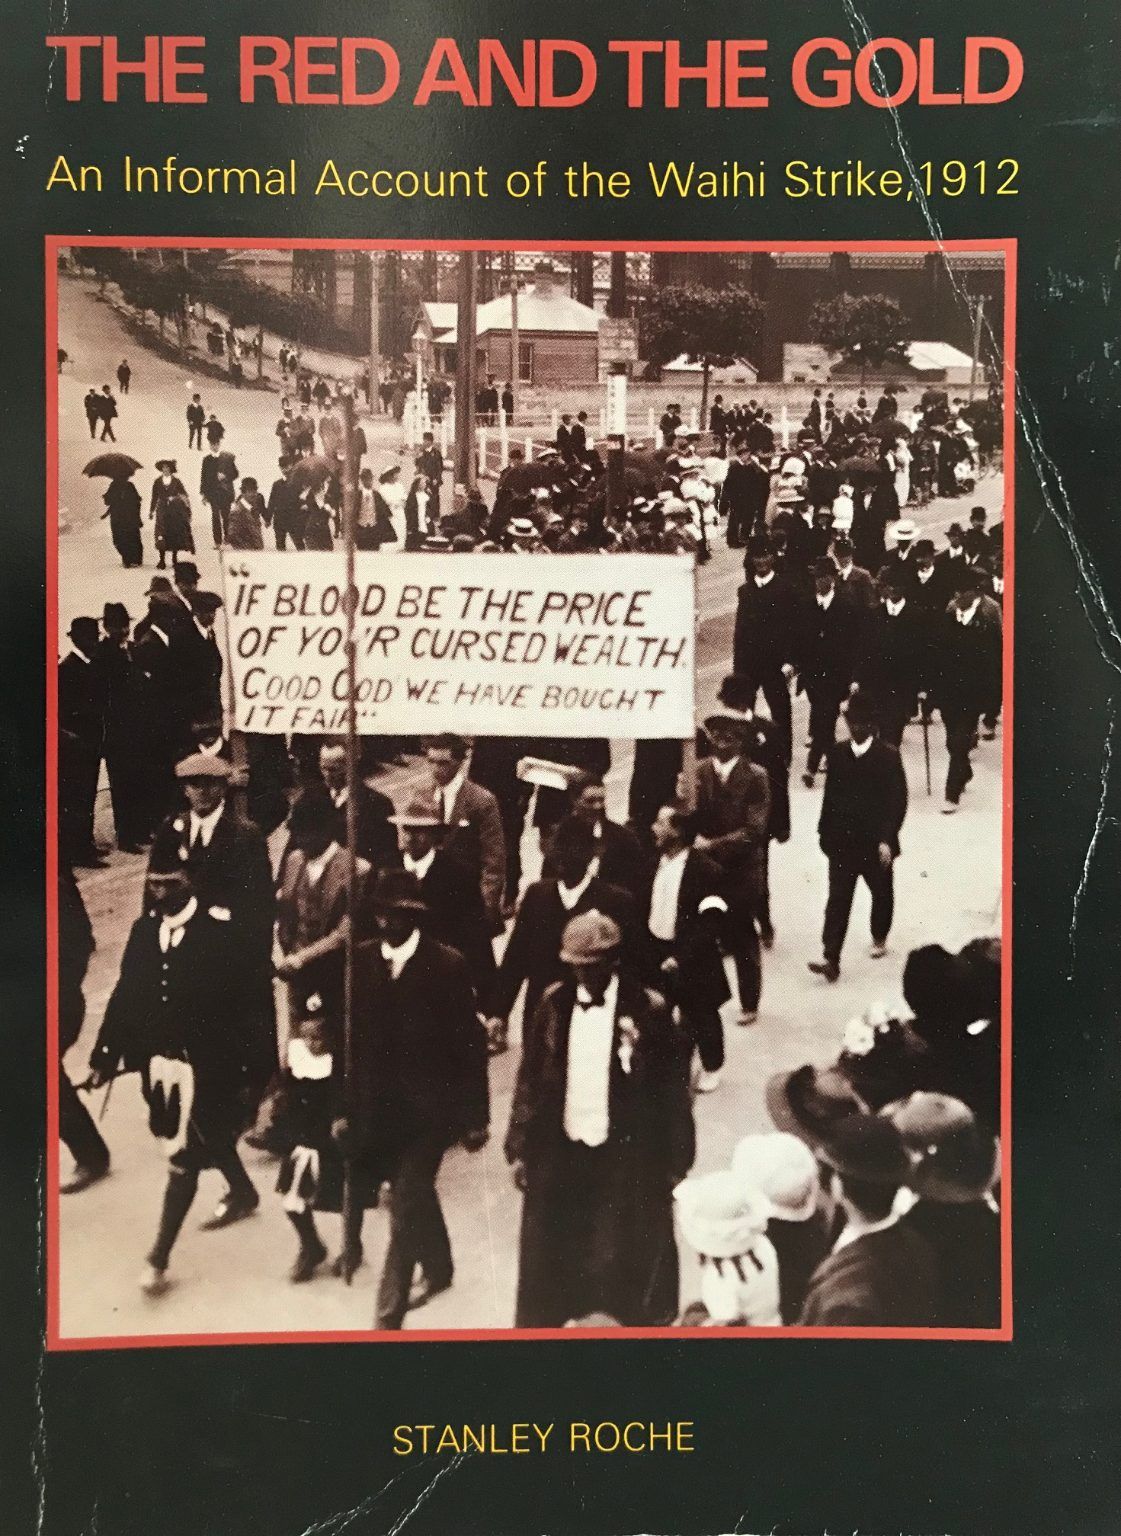 THE RED AND THE GOLD: An Informal Account of The Waihi Strike 1912